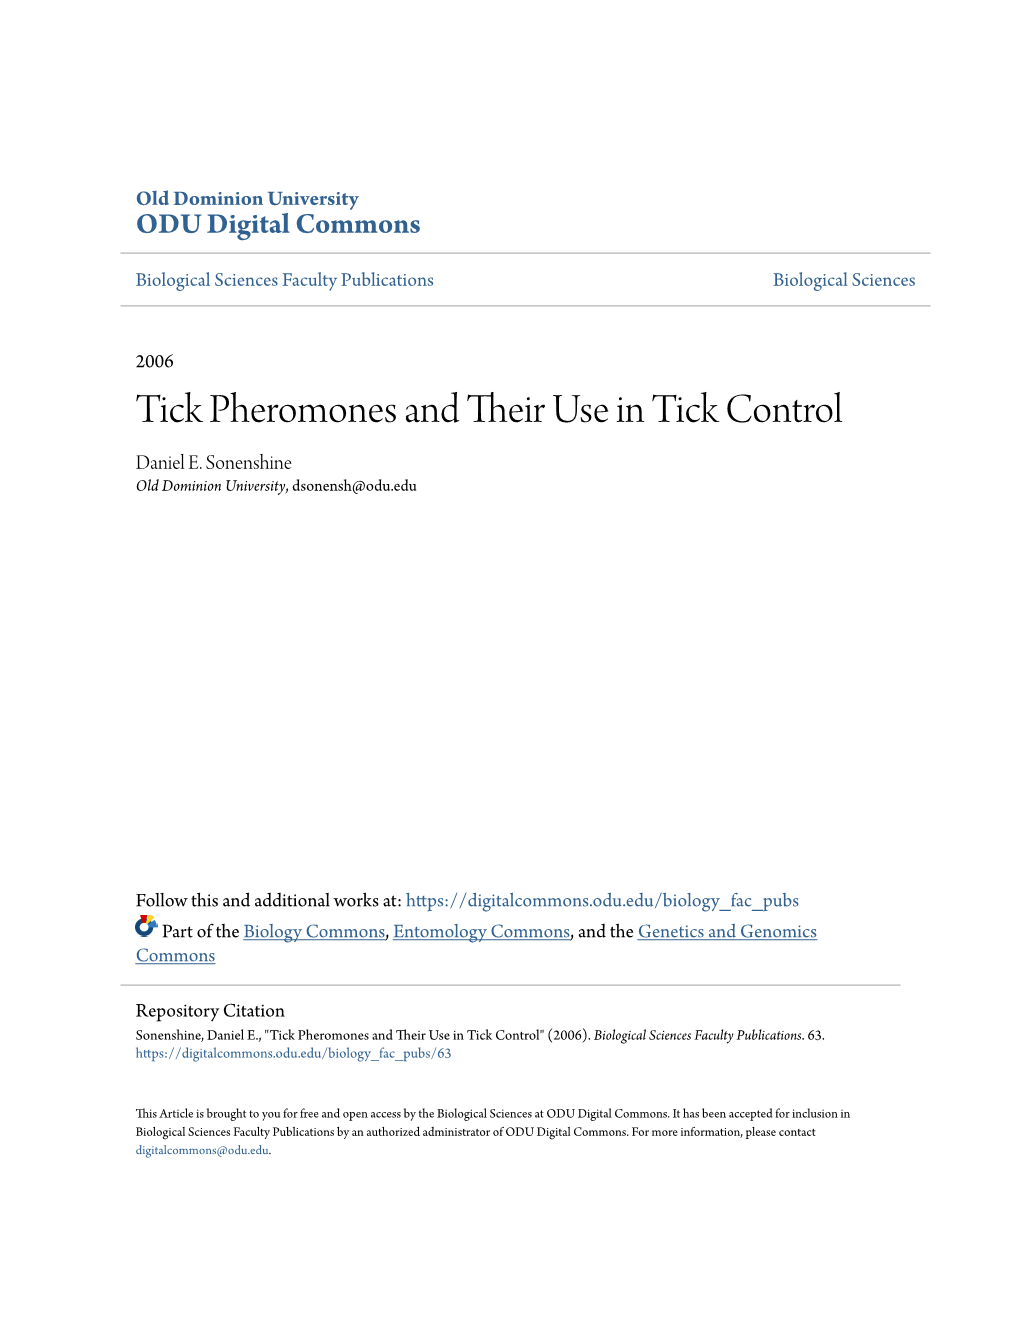 Tick Pheromones and Their Use in Tick Control